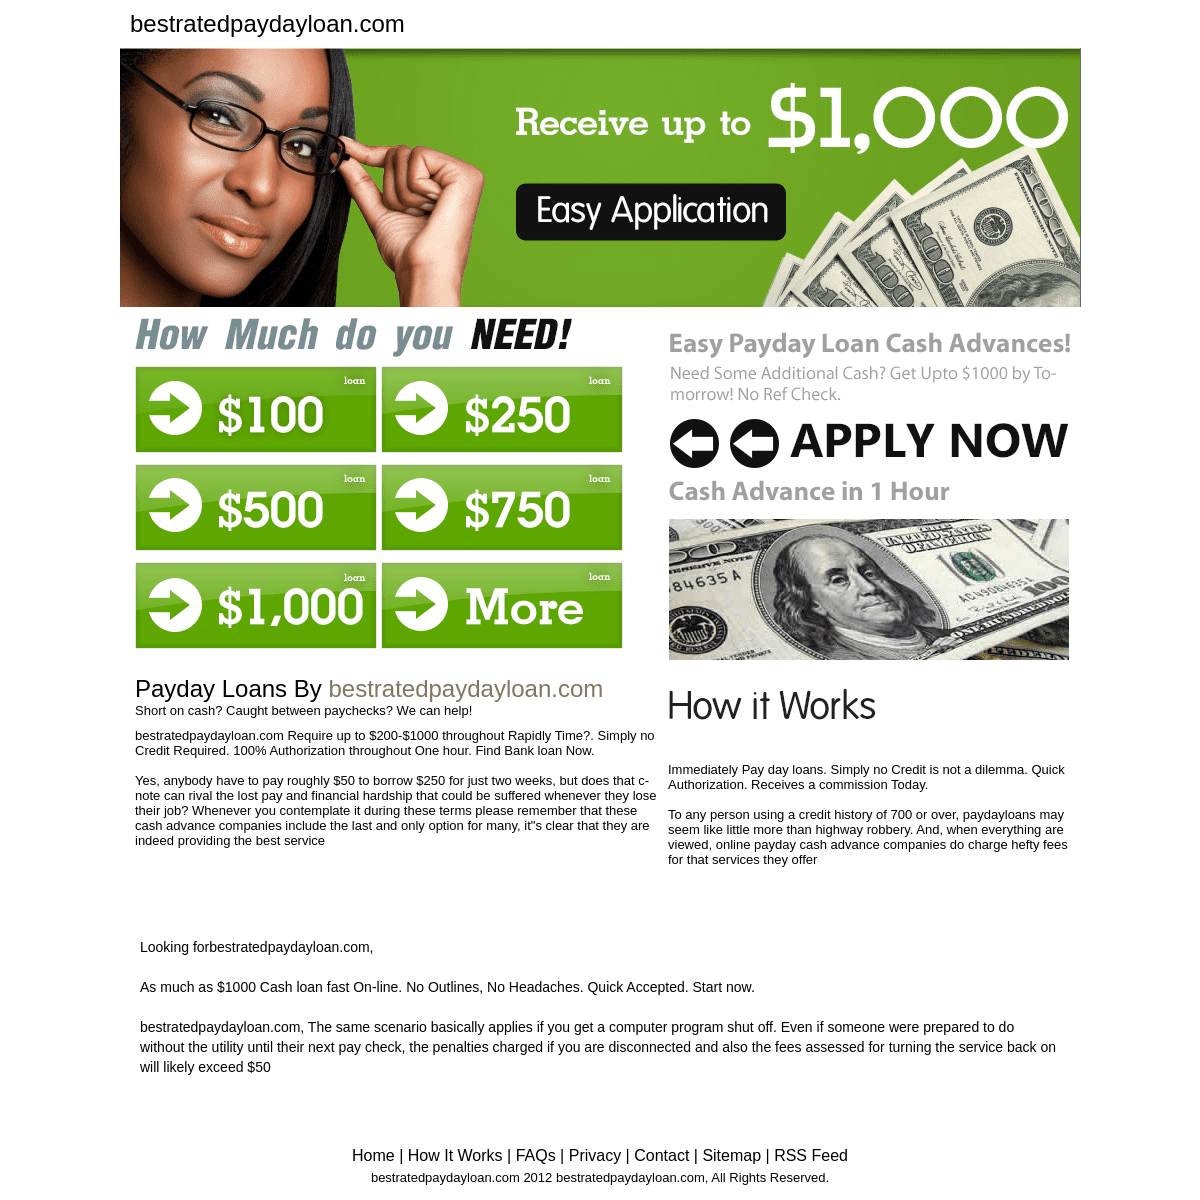 A complete backup of https://bestratedpaydayloan.com